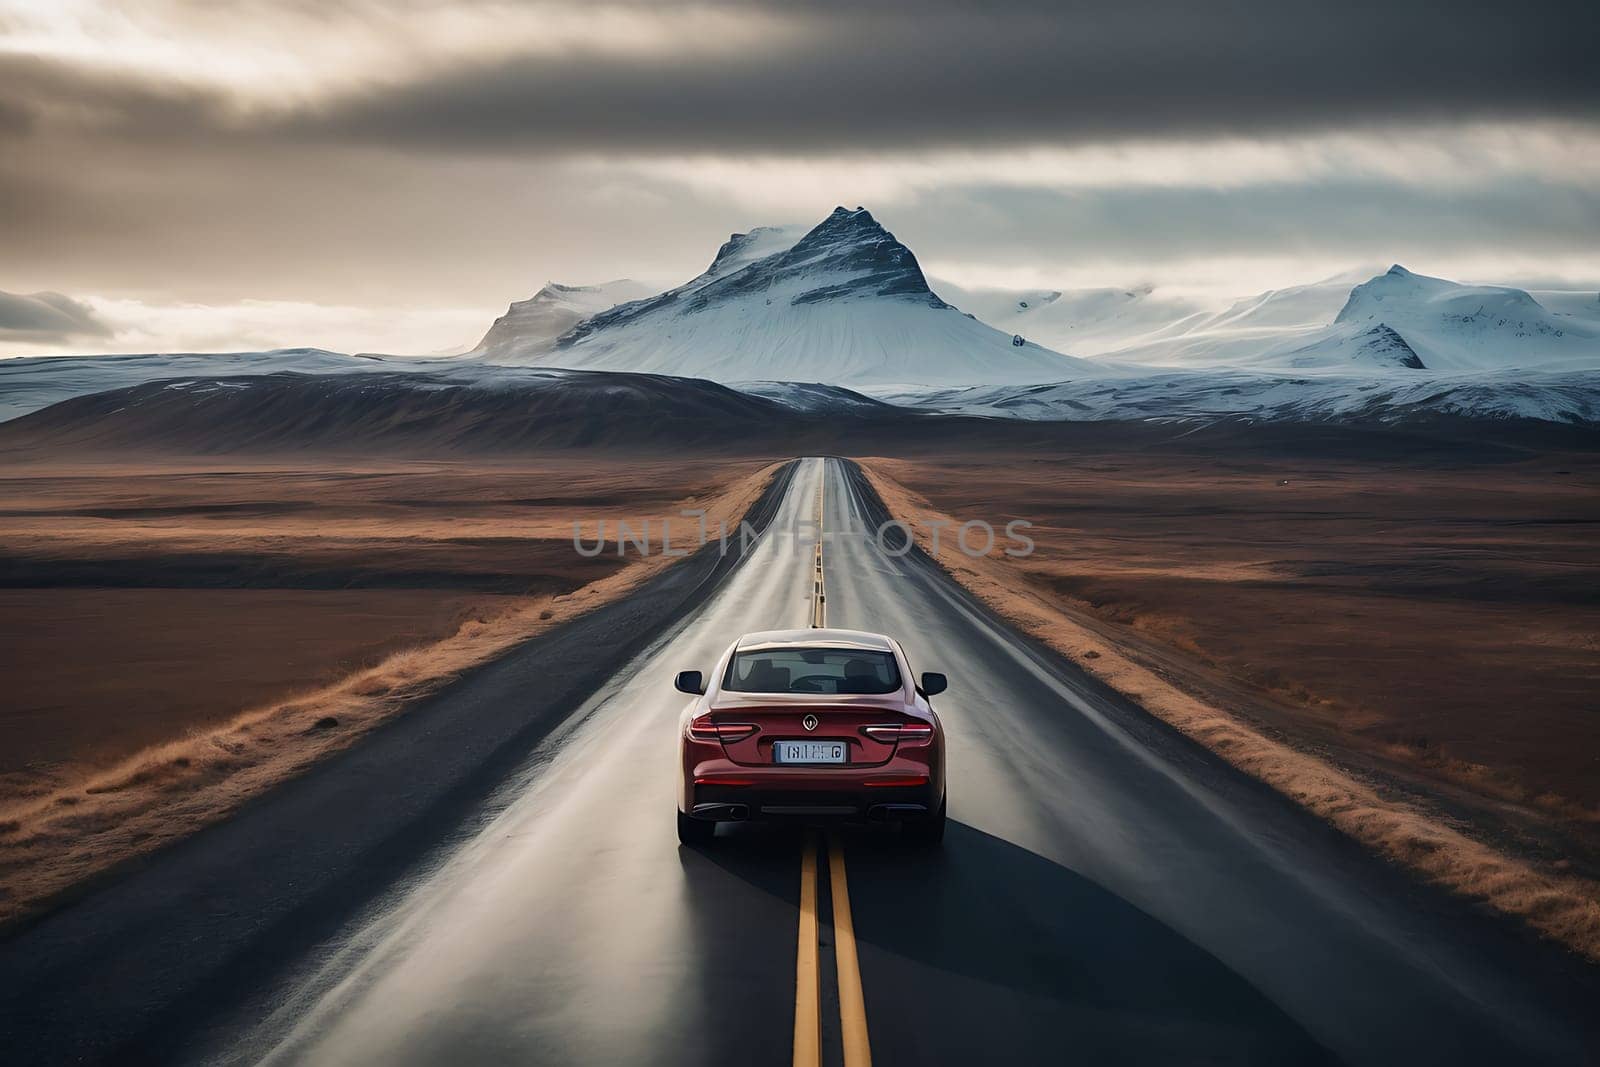 A red car cruises down a winding road, with majestic mountains towering in the distance.